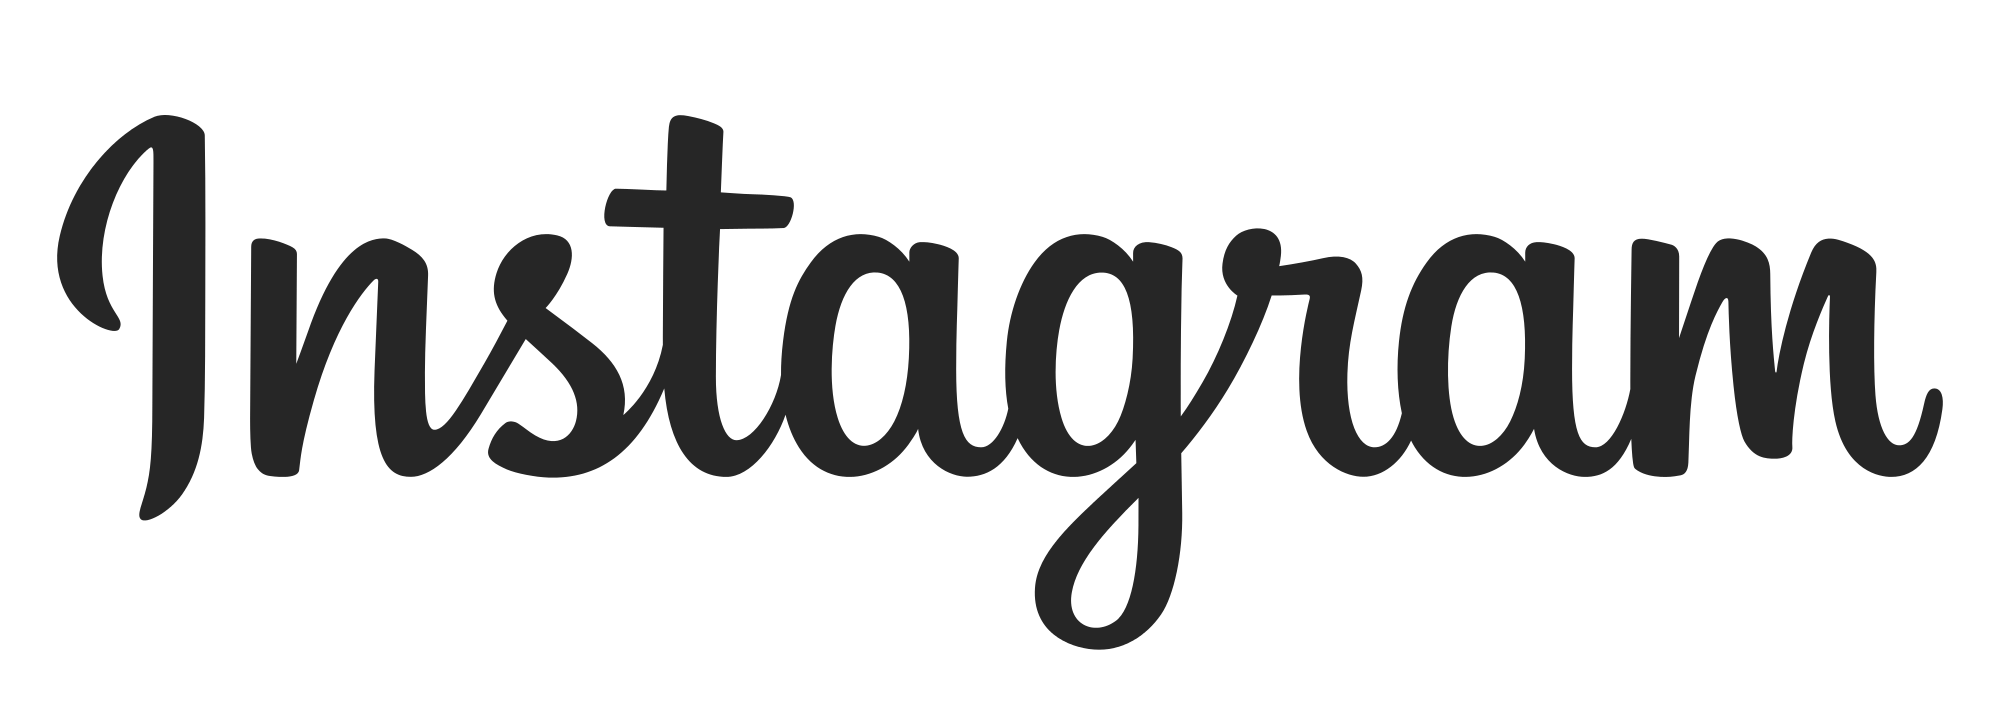 Logo Instagram Png Black And White